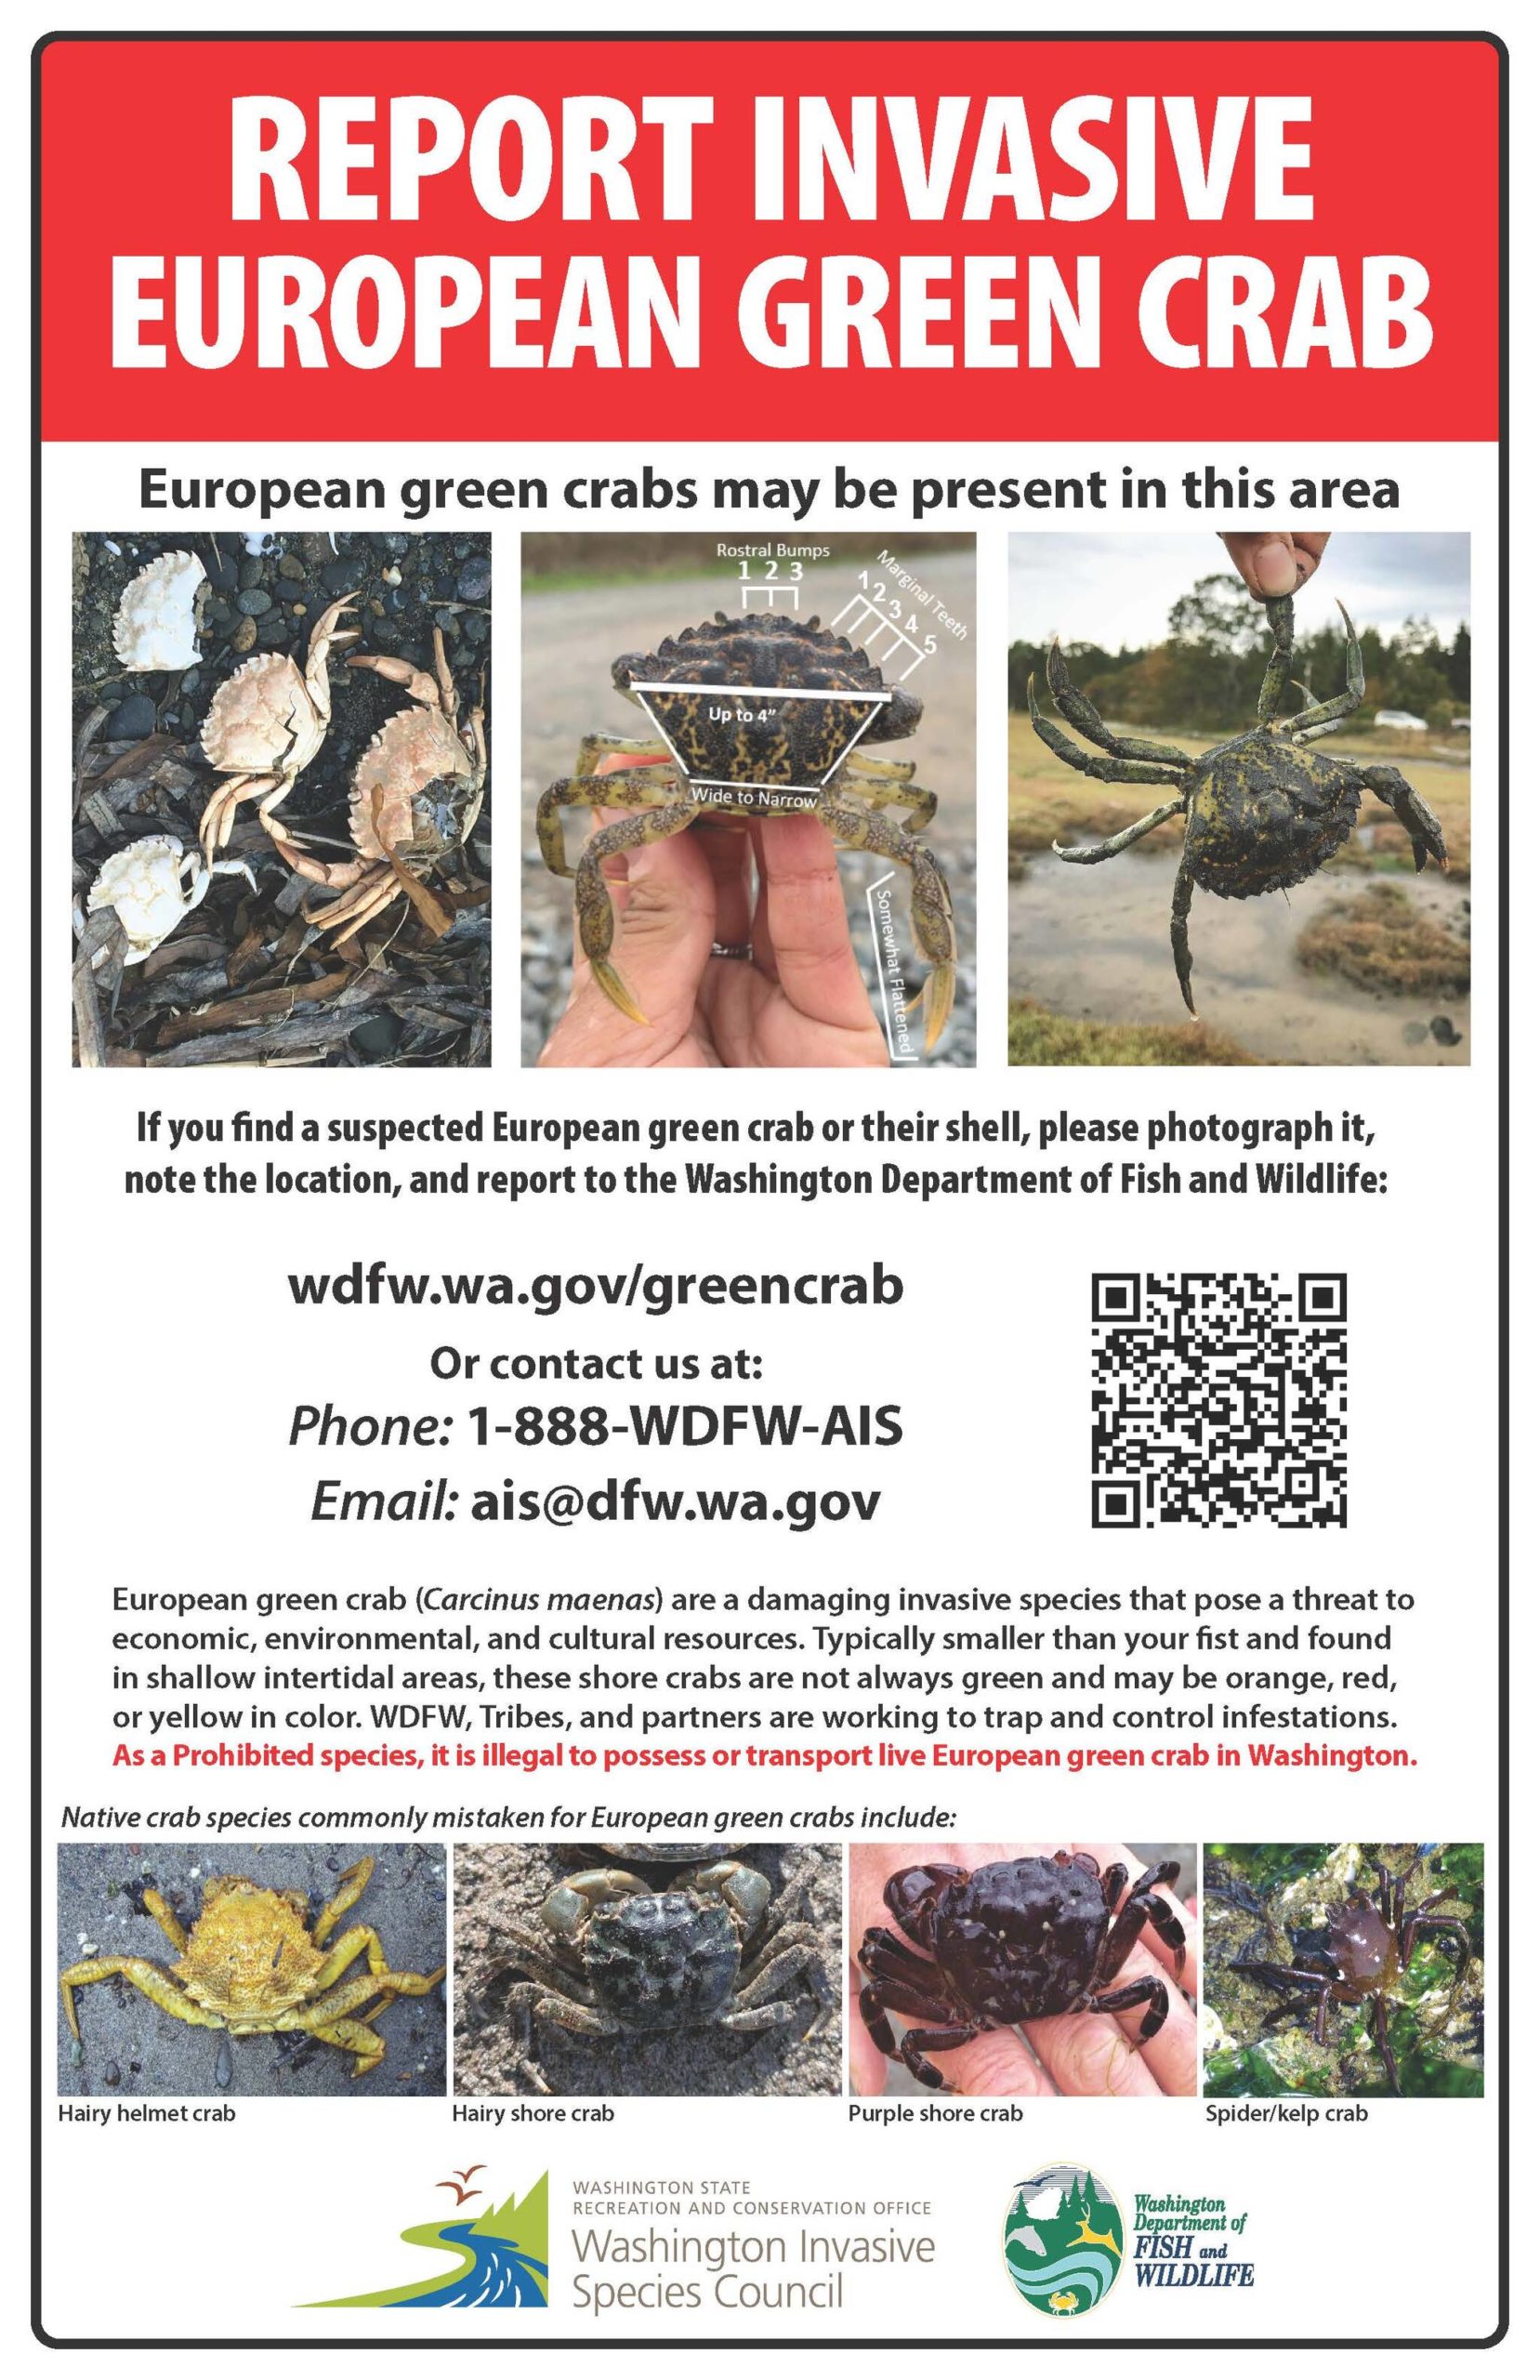 New sign from WDFW to support identification and reporting of European Green Crabs. Photo courtesy of Chase Gunnell.